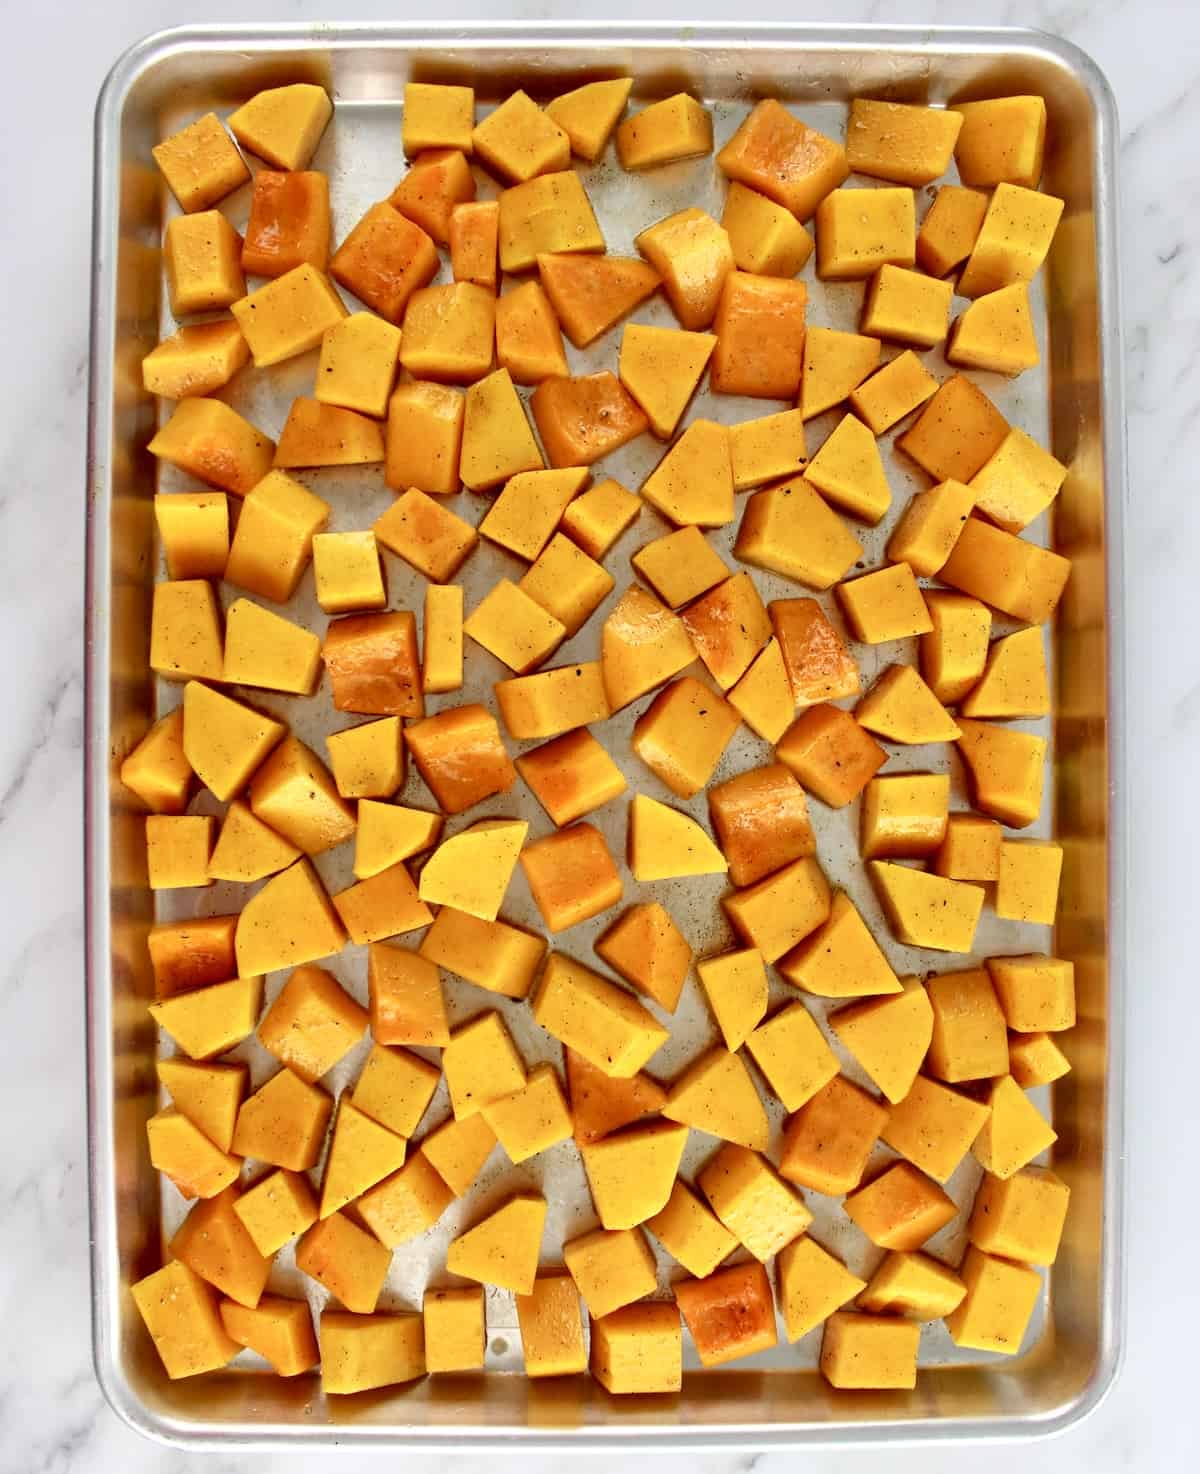 ucnooked butternut squash cubes on baking sheet with olive oil and cinnnamon